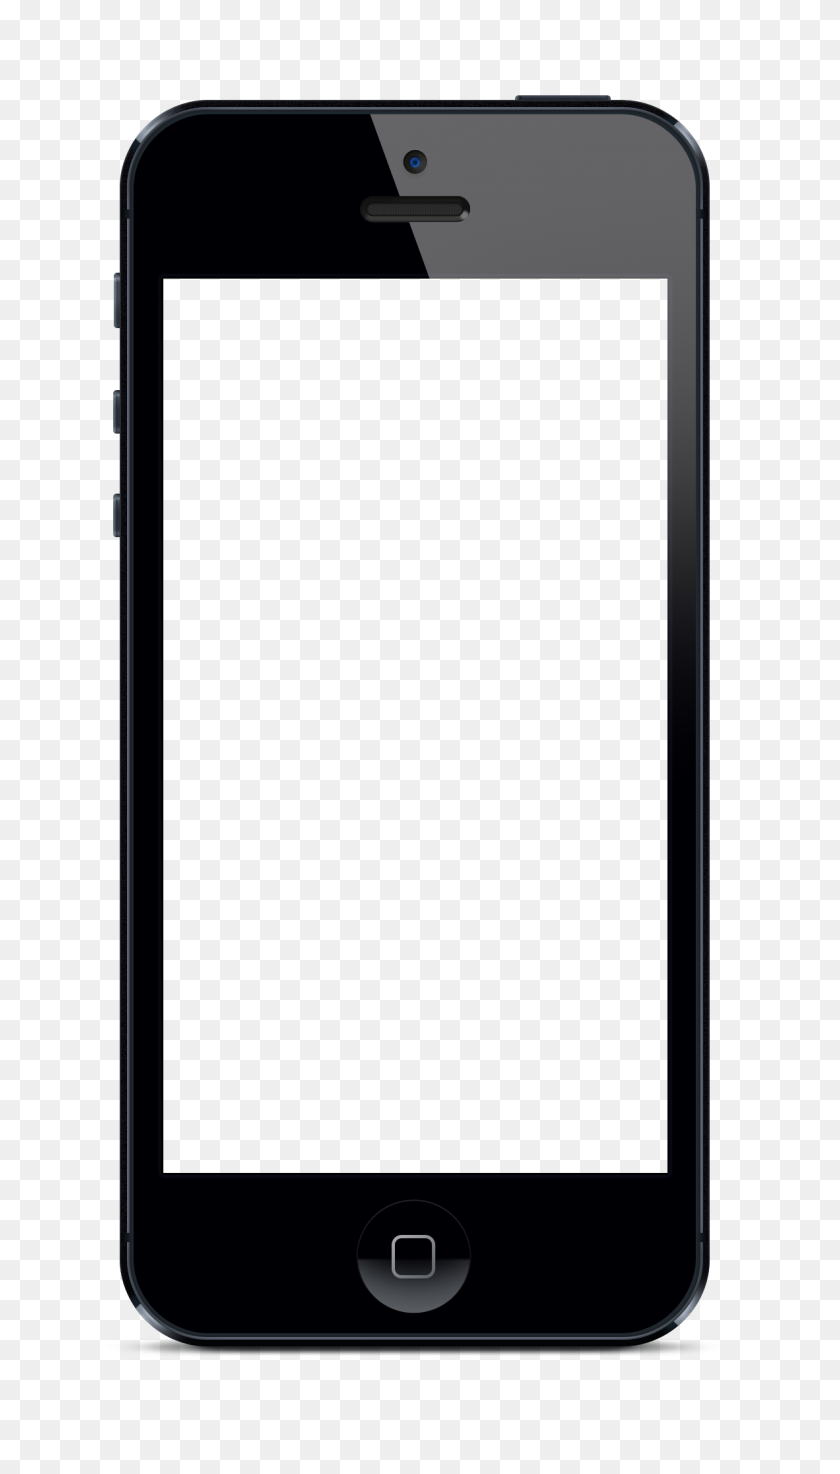 1182x2144 Iphone Png Black And White Transparent Iphone Black And White - Black Iphone PNG